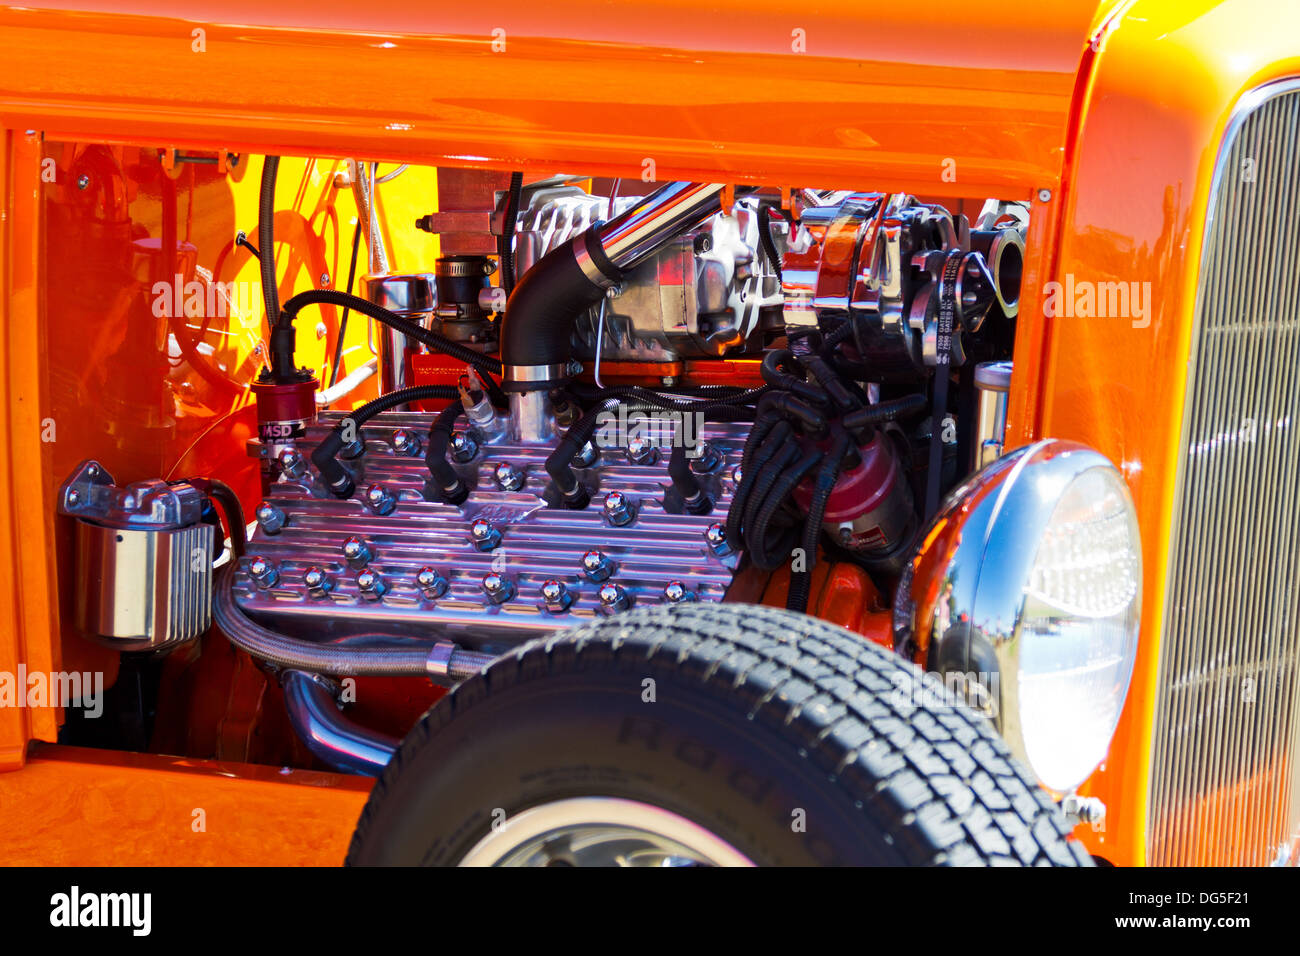 Closeup showing detail of 1949 Mercury engine in a 1932 Ford hot-rod. Stock Photo